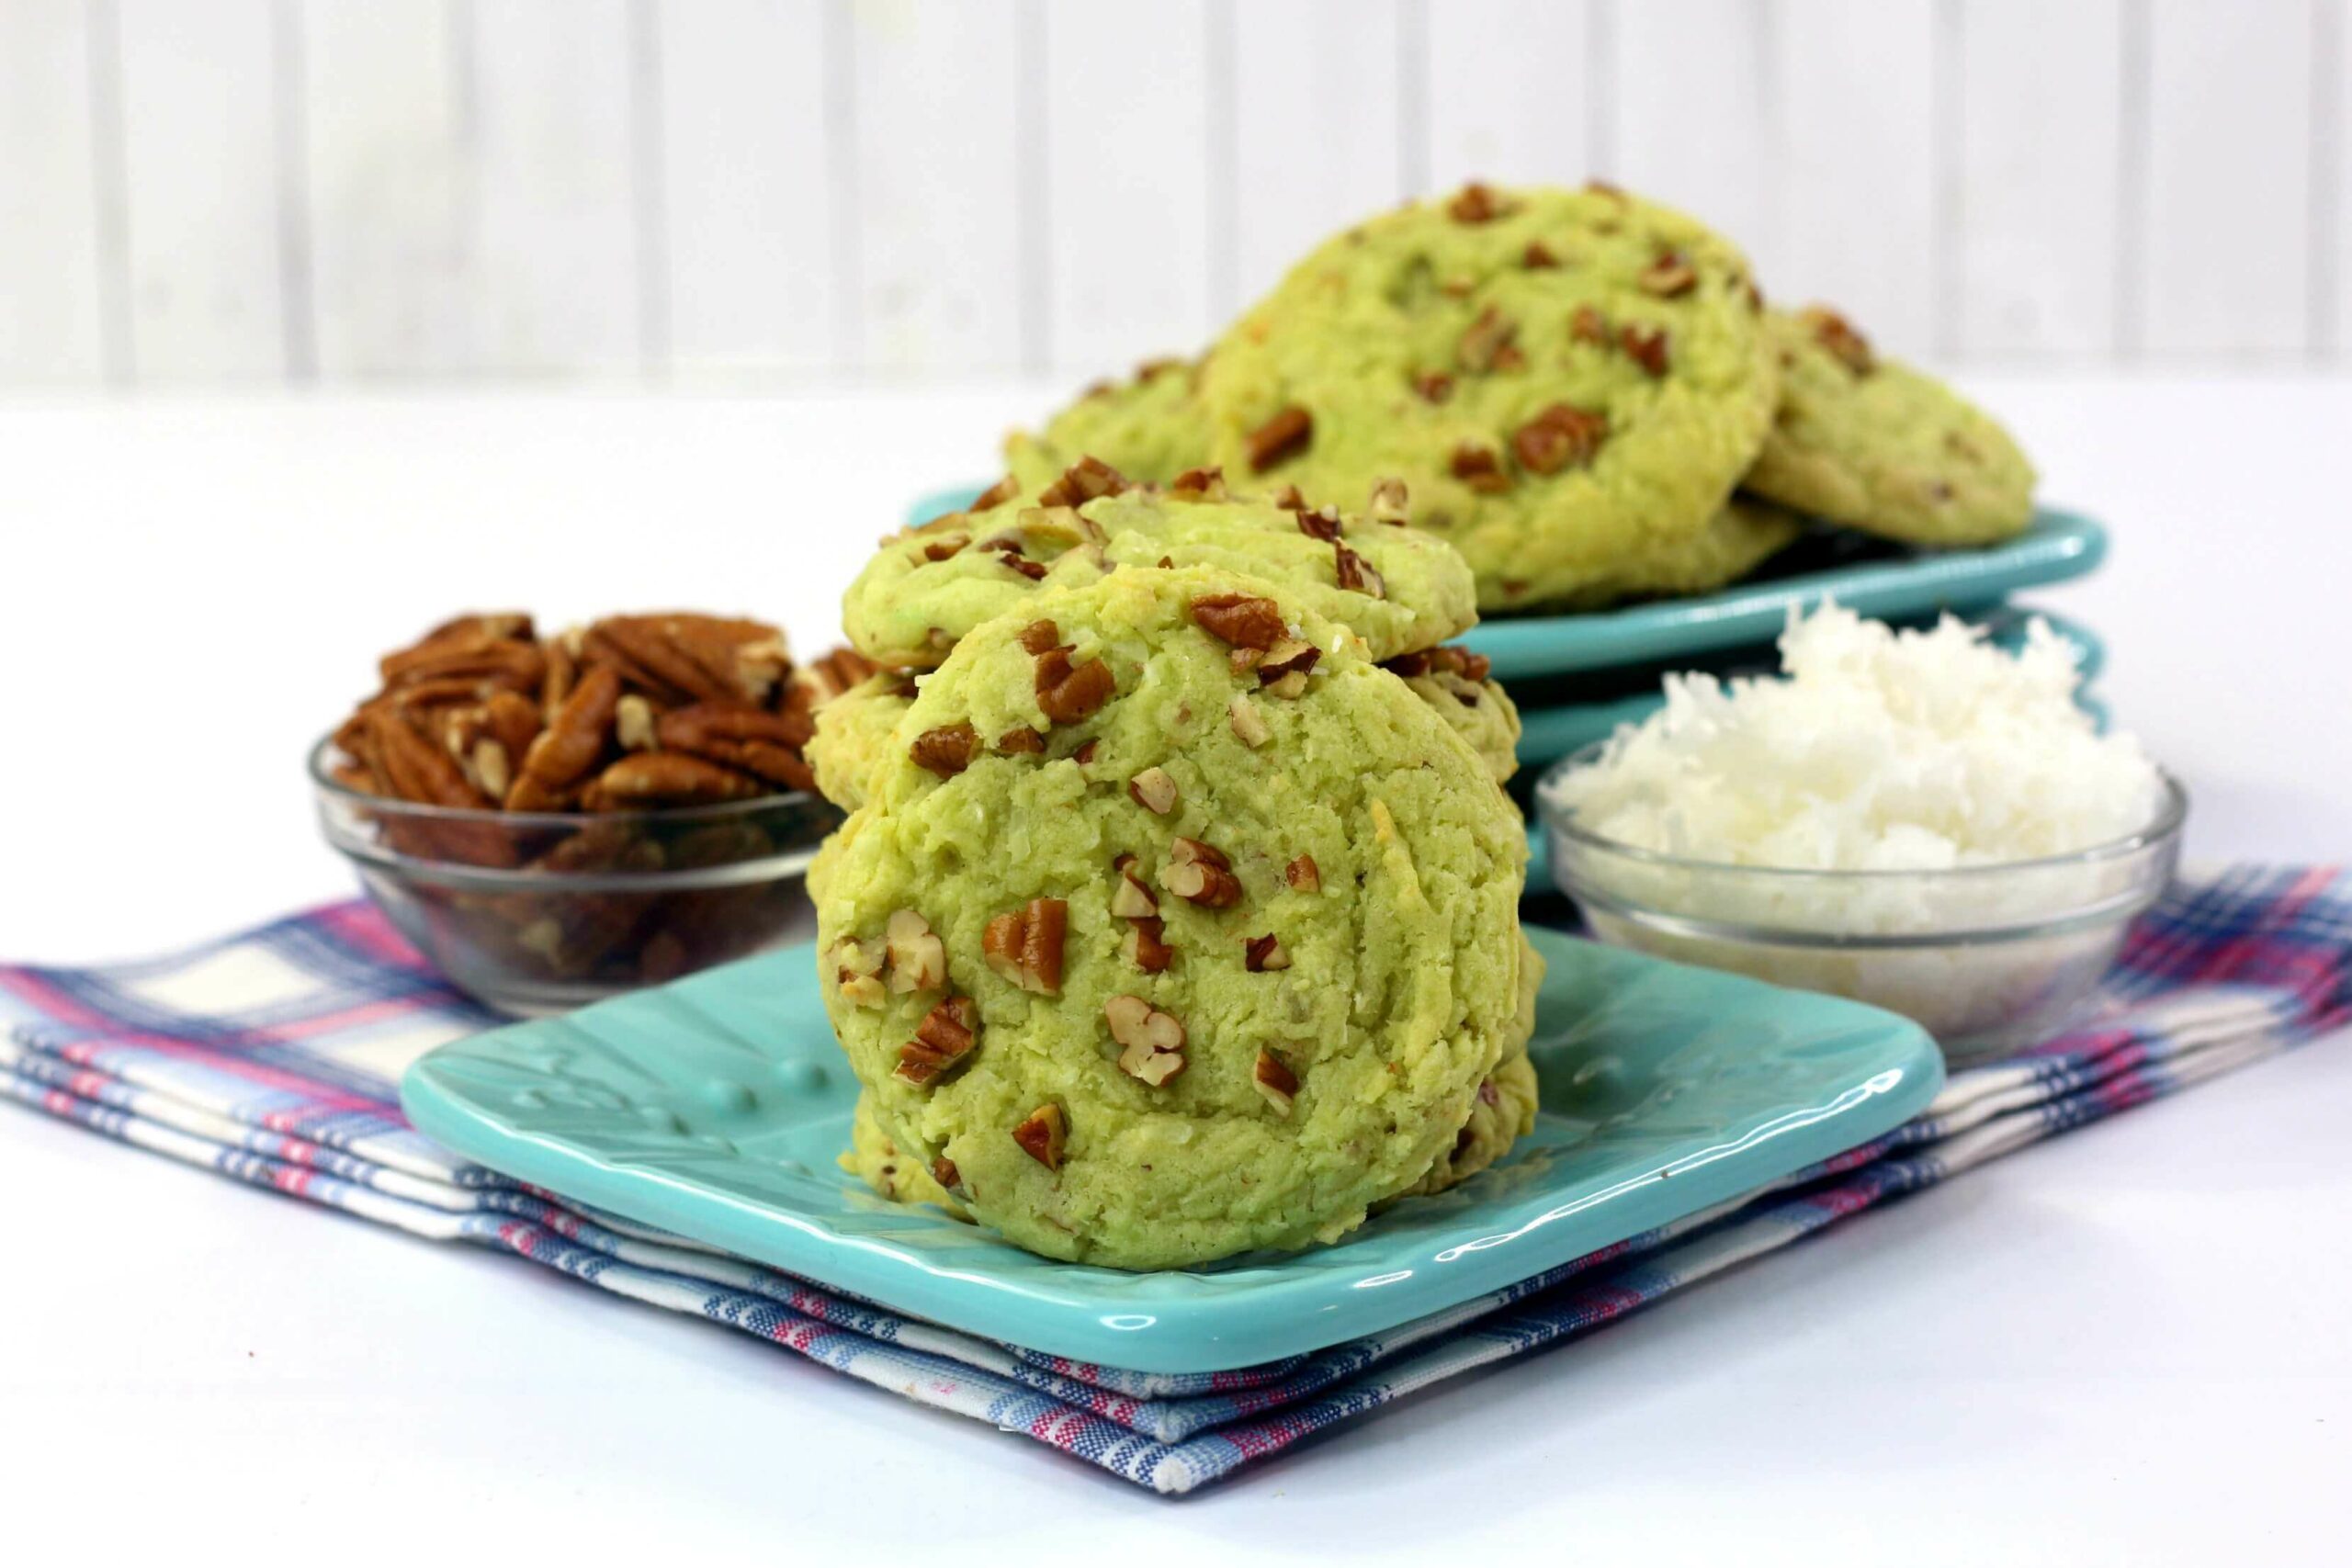 A platter of the finished watergate pistachio cookies with on cookie featured on its side.